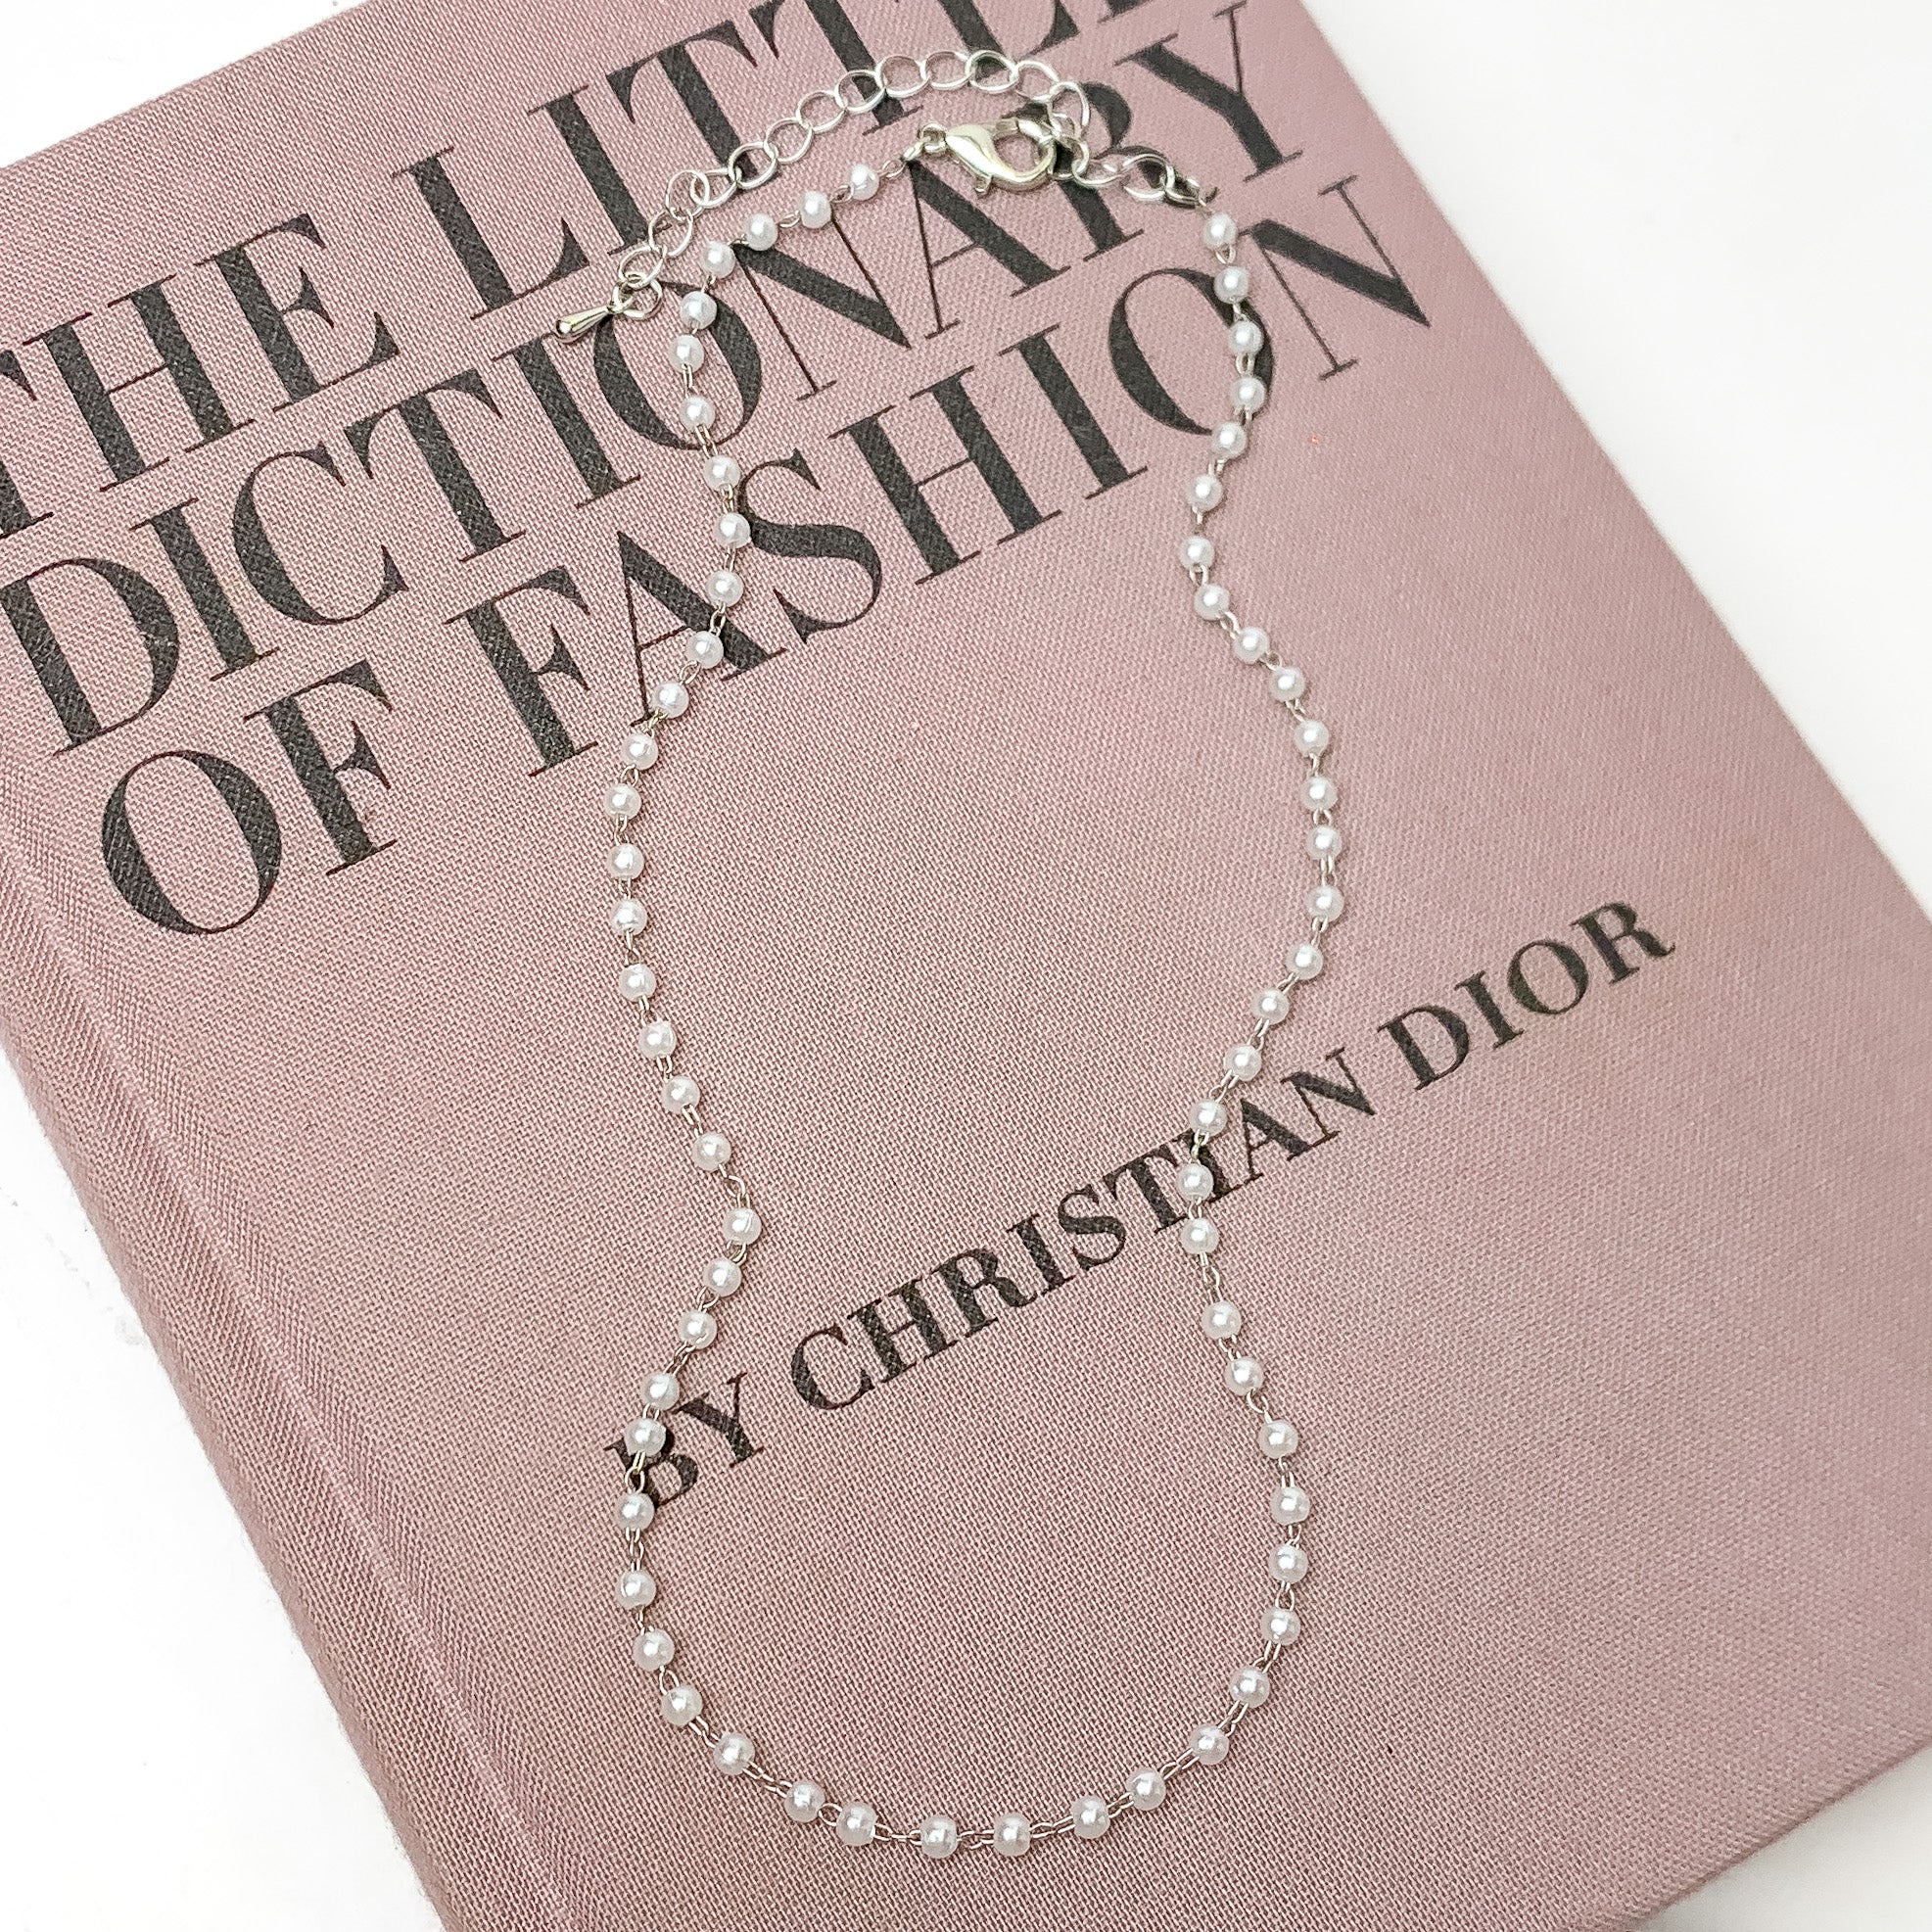 Pearl Linked Necklace in Silver Tone. Pictured on a white background with the necklace laying on a pink book.